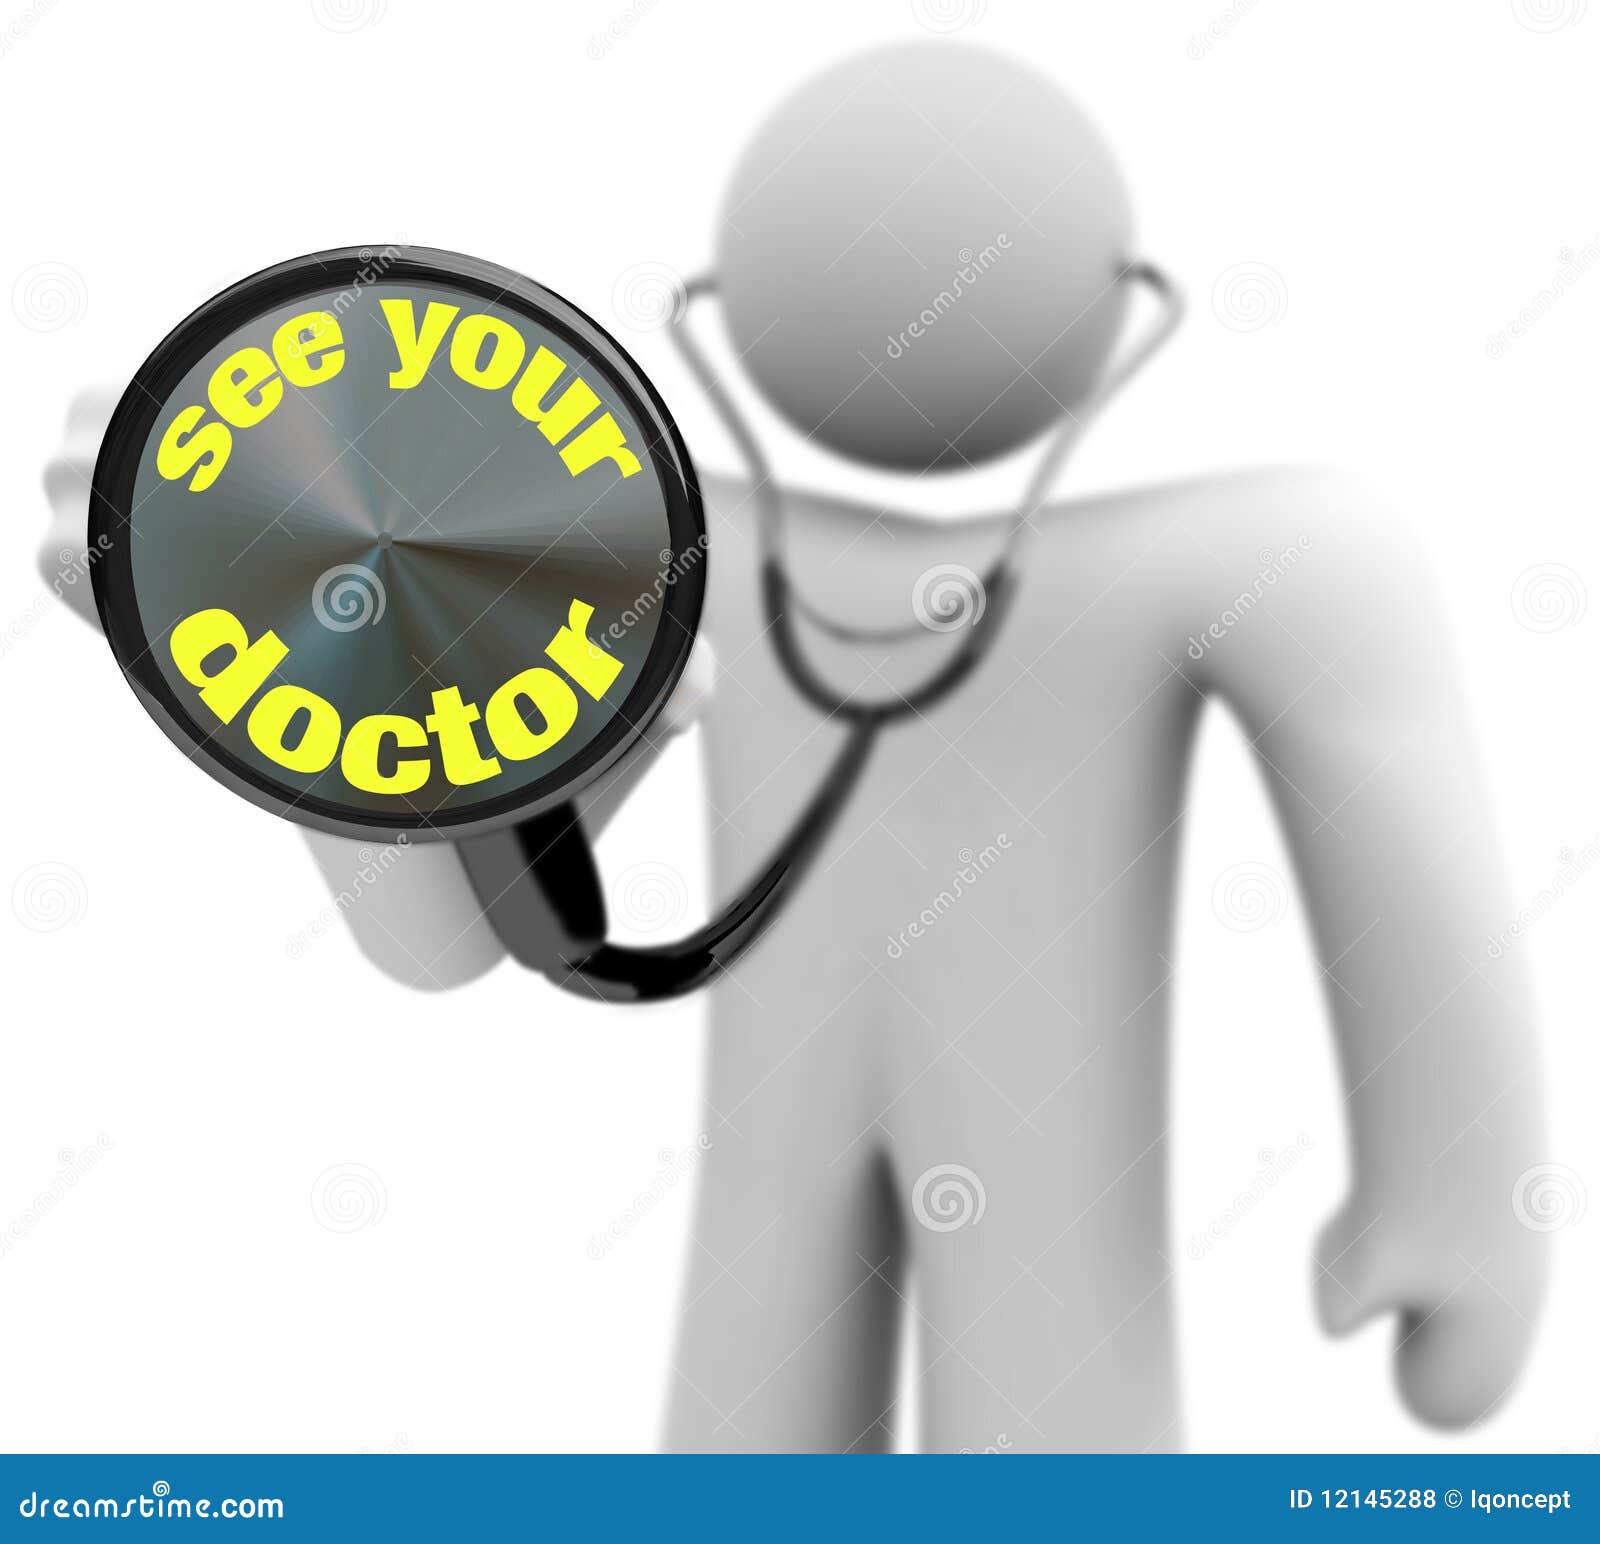 See Your Doctor - Stethoscope Stock Illustration - Image 